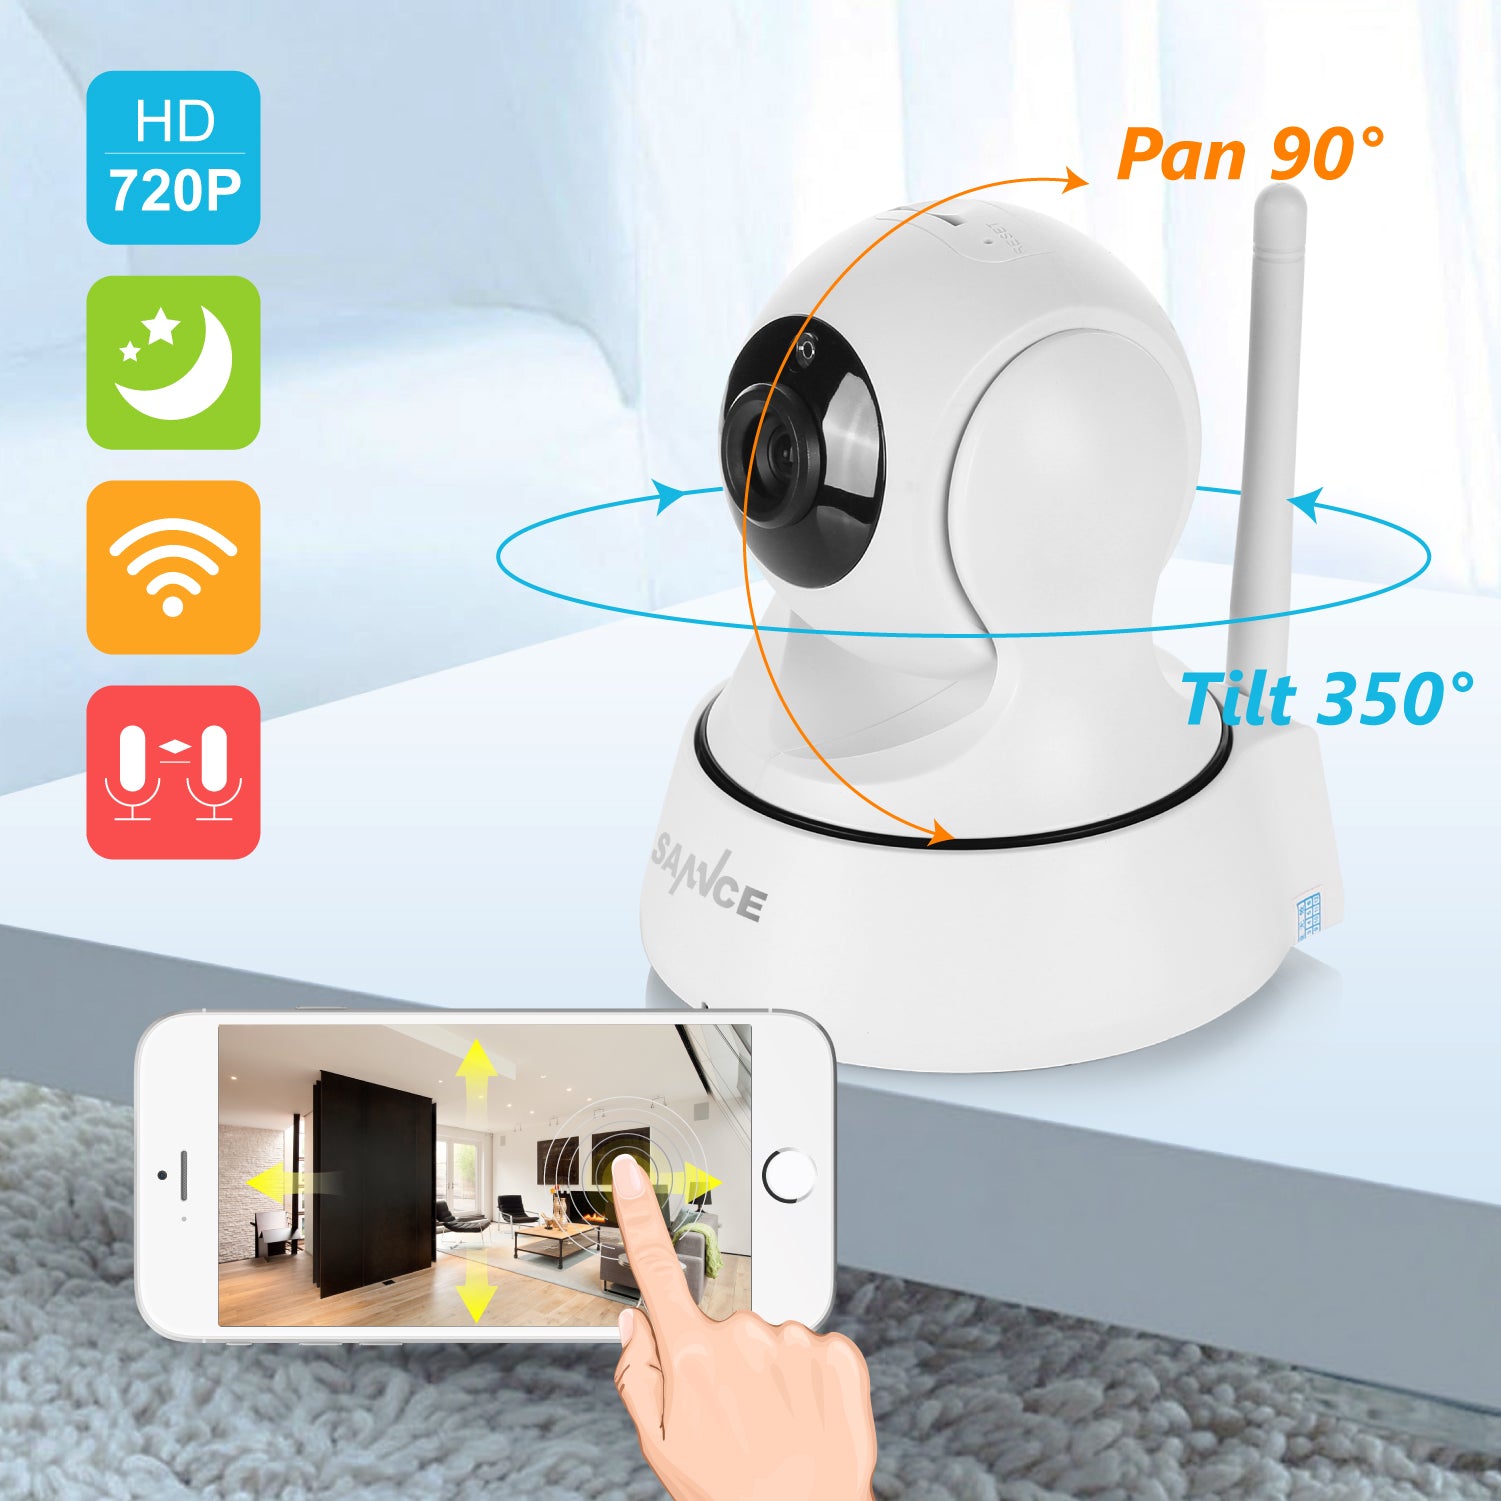 sannce smart home security made easy